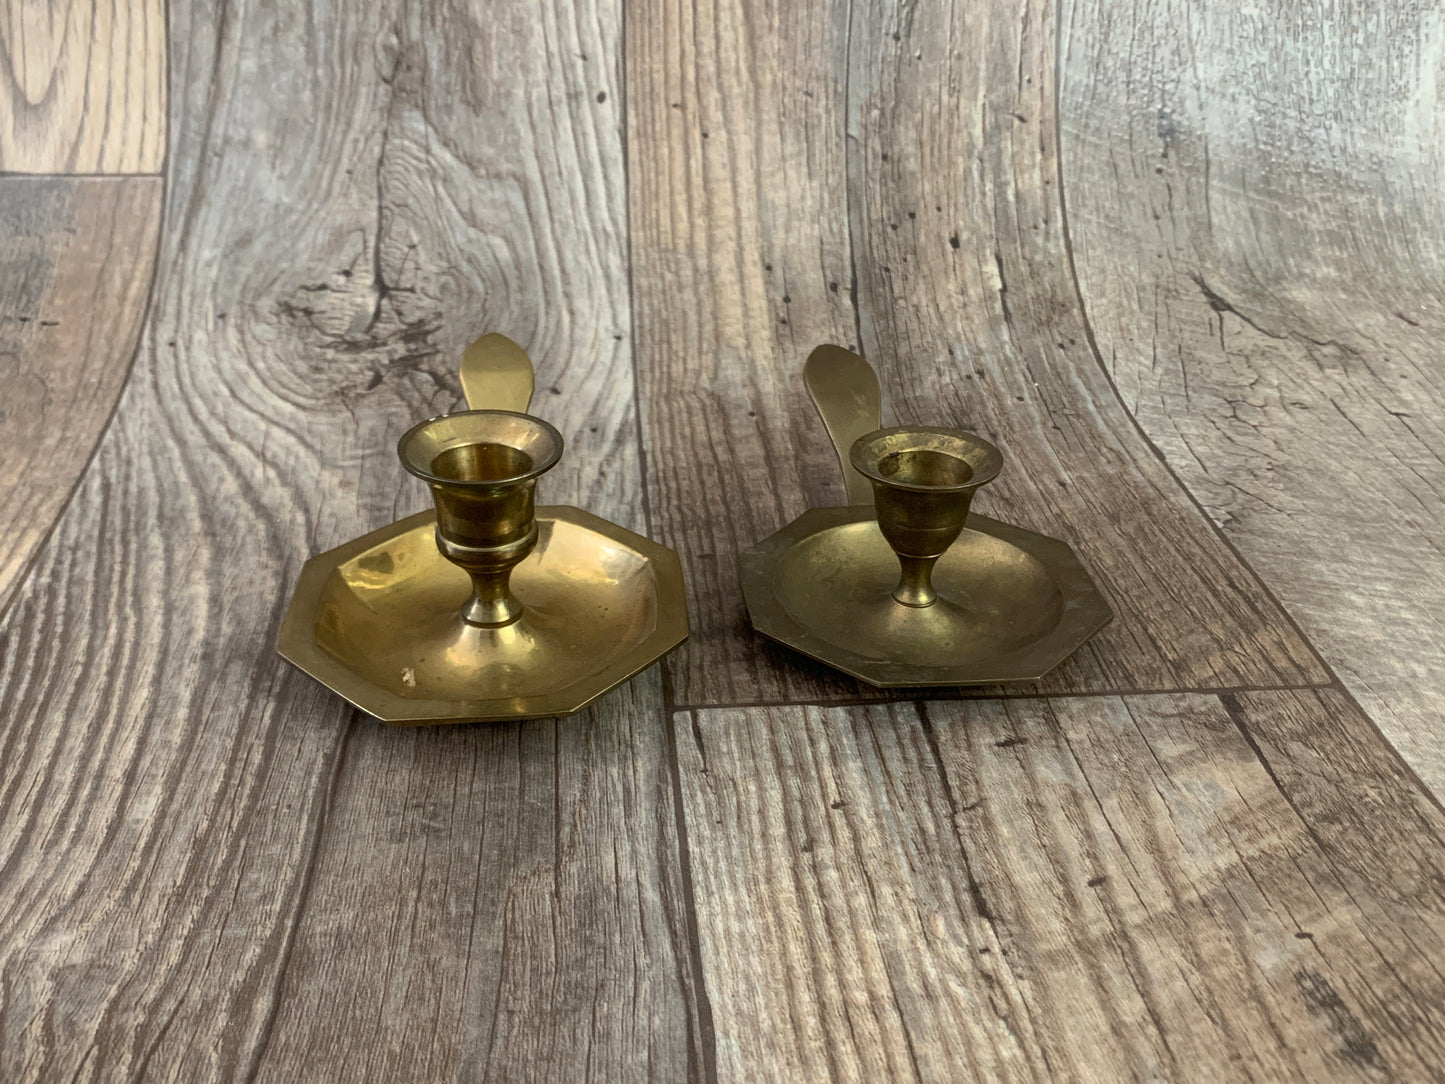 Pair of Brass Candlestick Holders with Handle Vintage Brass Home Decor